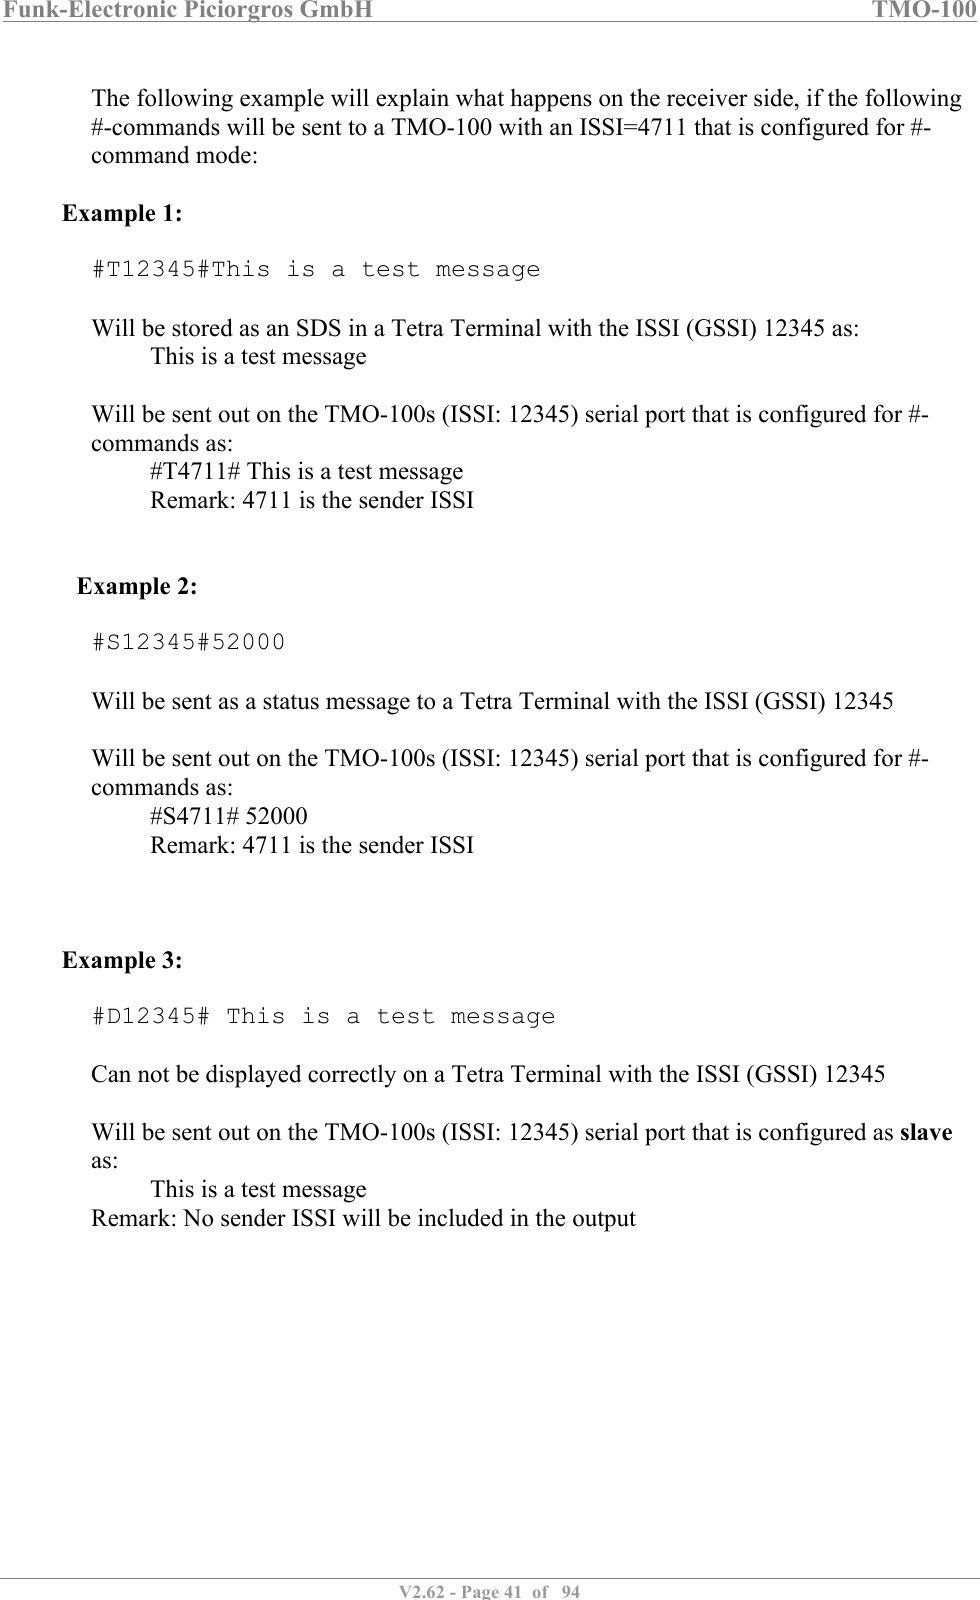 Funk-Electronic Piciorgros GmbH   TMO-100   V2.62 - Page 41  of   94   The following example will explain what happens on the receiver side, if the following #-commands will be sent to a TMO-100 with an ISSI=4711 that is configured for #-command mode:  Example 1:  #T12345#This is a test message  Will be stored as an SDS in a Tetra Terminal with the ISSI (GSSI) 12345 as:   This is a test message  Will be sent out on the TMO-100s (ISSI: 12345) serial port that is configured for #-commands as: #T4711# This is a test message   Remark: 4711 is the sender ISSI    Example 2:  #S12345#52000  Will be sent as a status message to a Tetra Terminal with the ISSI (GSSI) 12345  Will be sent out on the TMO-100s (ISSI: 12345) serial port that is configured for #-commands as: #S4711# 52000   Remark: 4711 is the sender ISSI    Example 3:  #D12345# This is a test message  Can not be displayed correctly on a Tetra Terminal with the ISSI (GSSI) 12345  Will be sent out on the TMO-100s (ISSI: 12345) serial port that is configured as slave as: This is a test message  Remark: No sender ISSI will be included in the output   